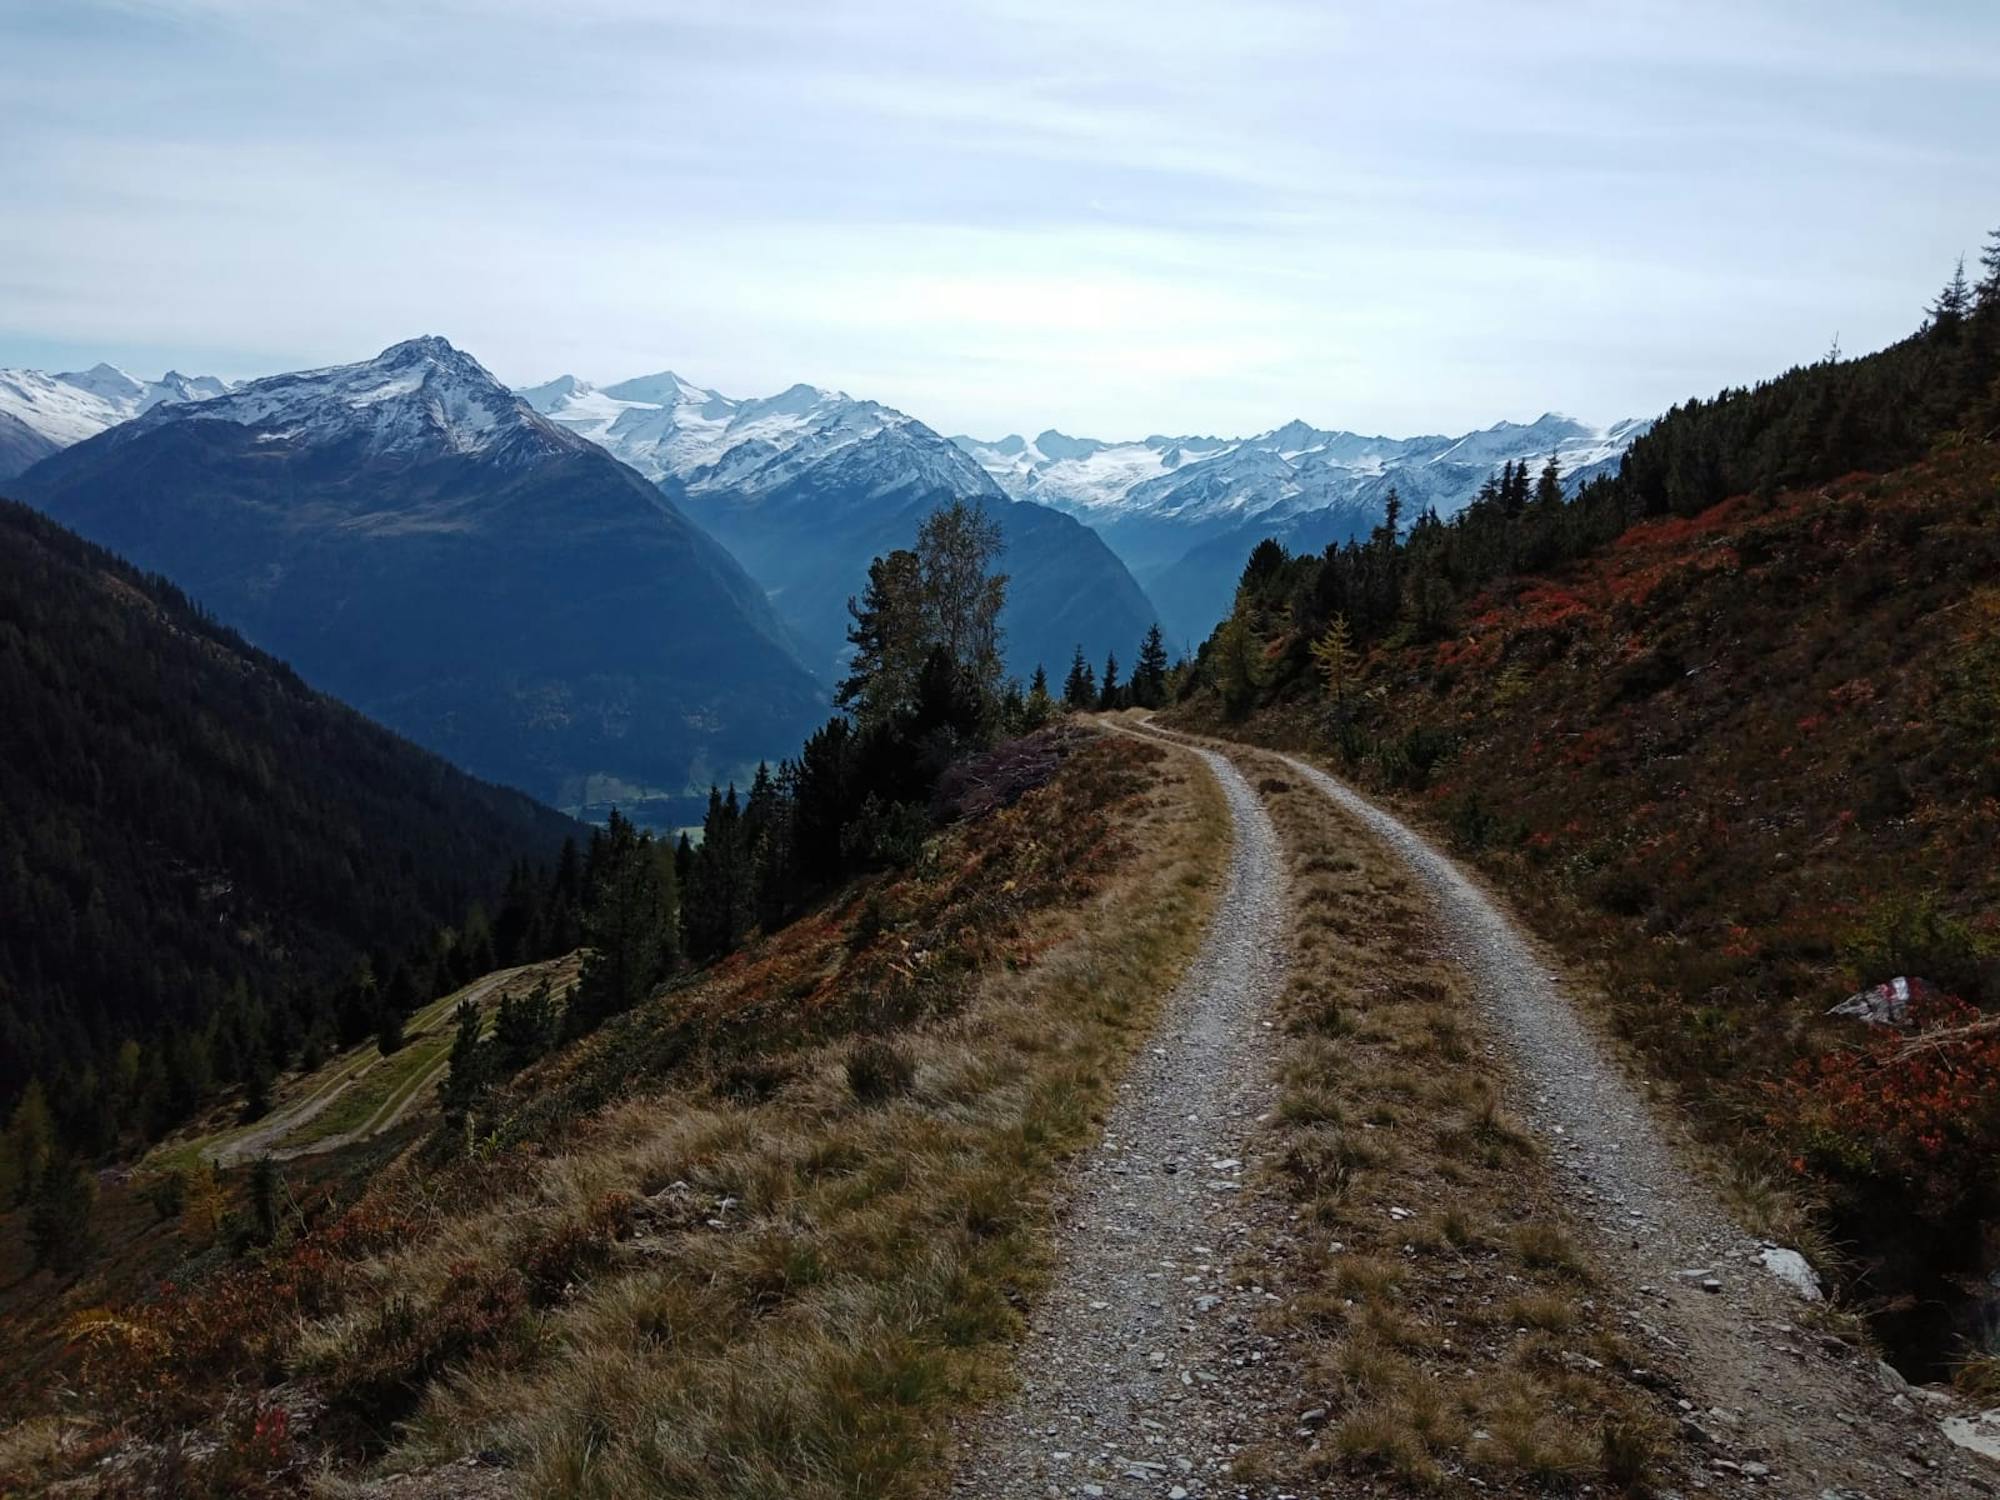 On the descent to the Steiner Alm.